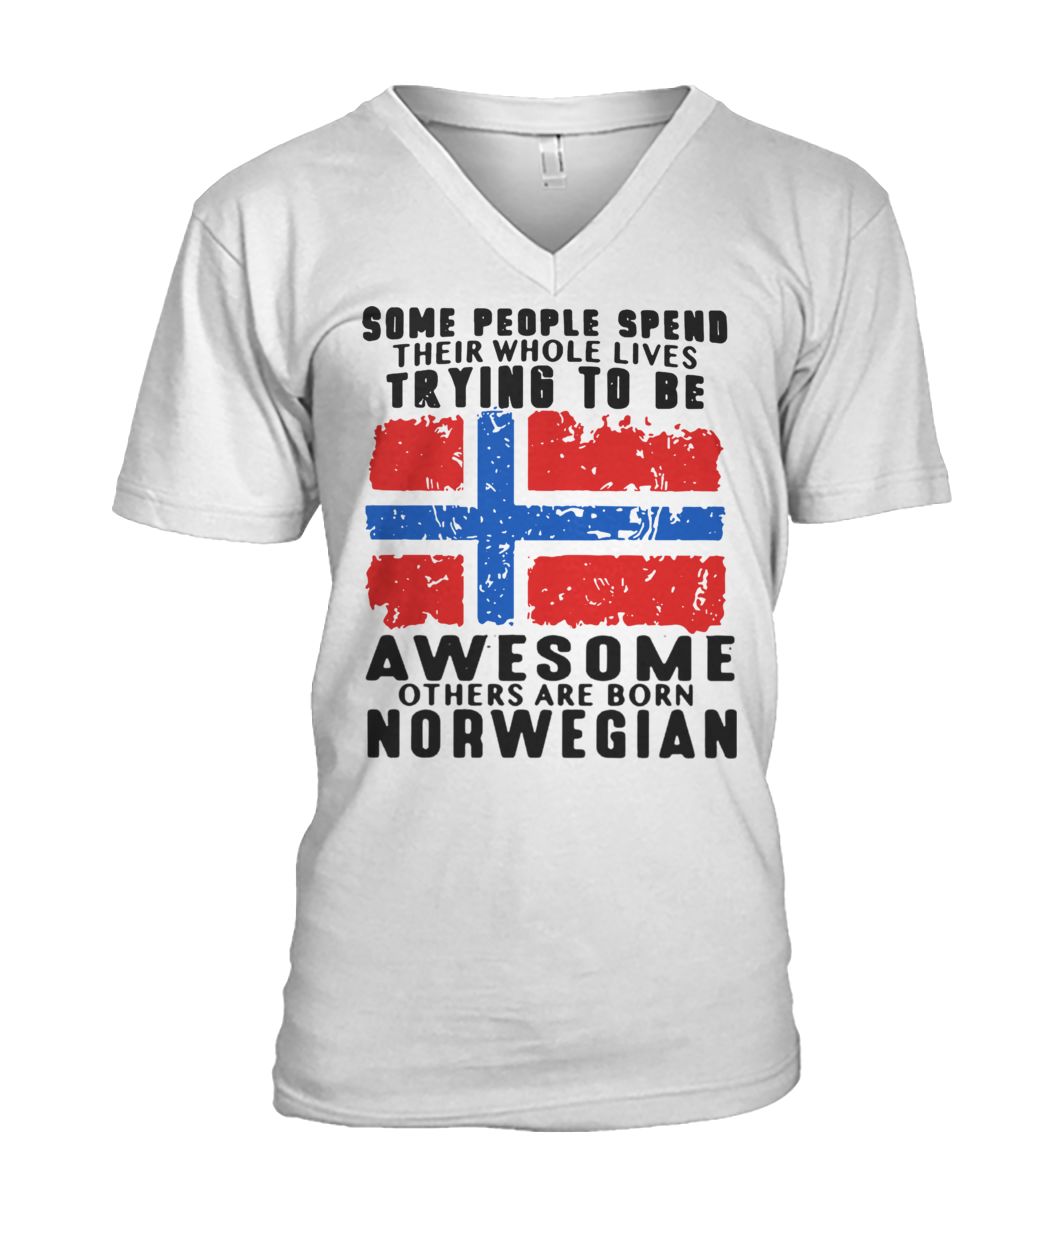 Some people spend their whole lives trying to be awesome others are born norwegian mens v-neck